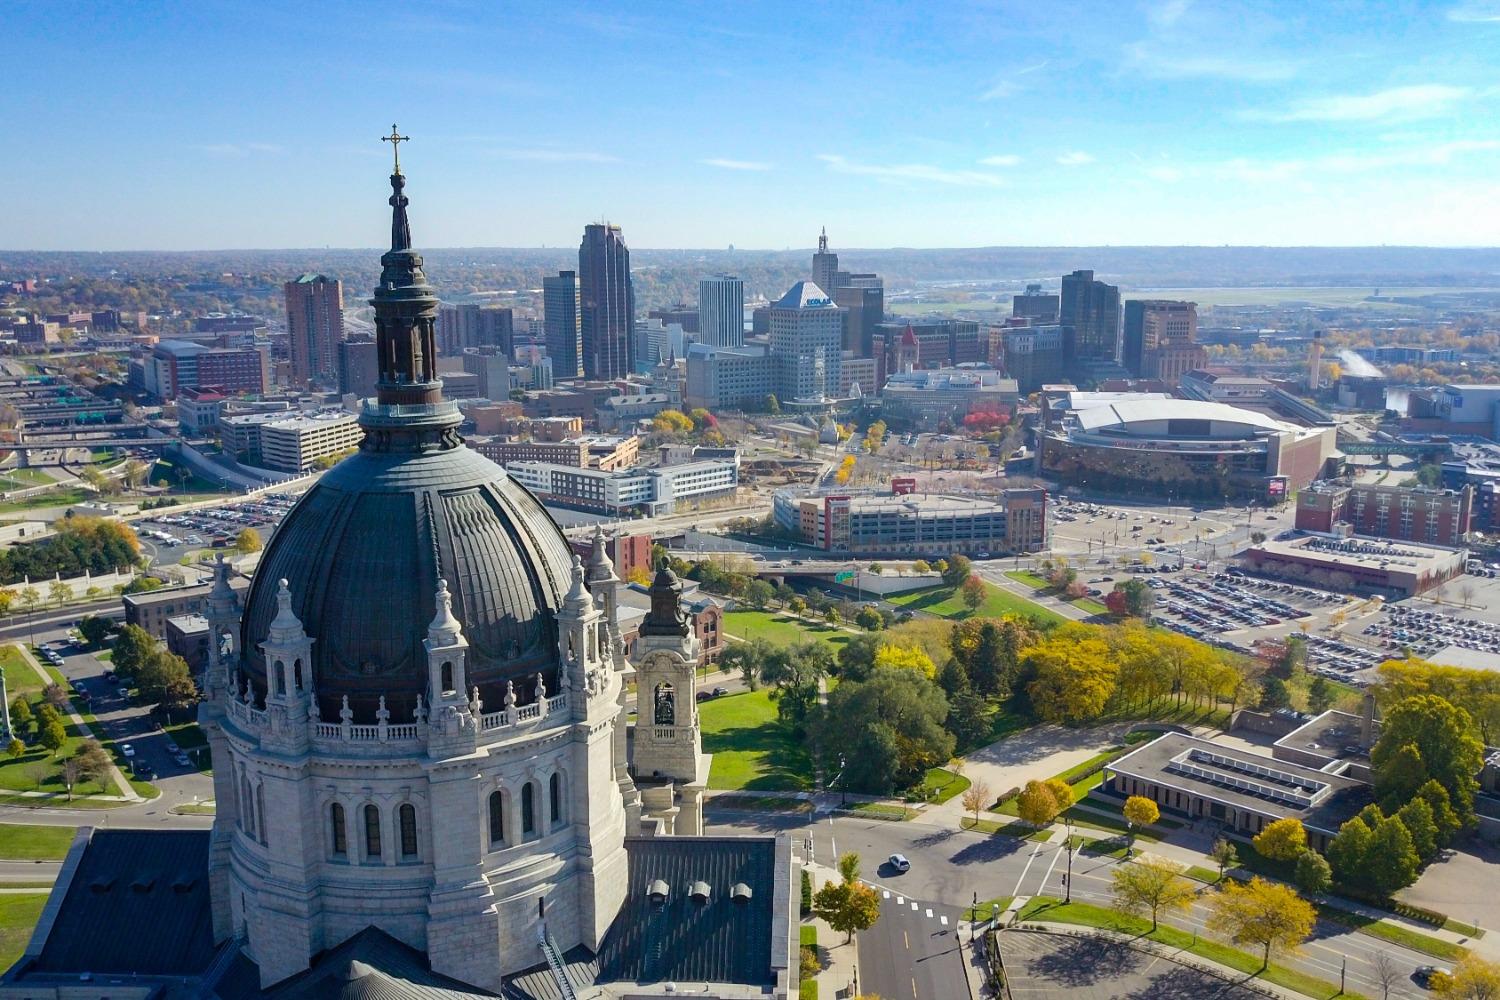 The Cathedral of St. Paul overlooking Downtown St. Paul, Minnesota